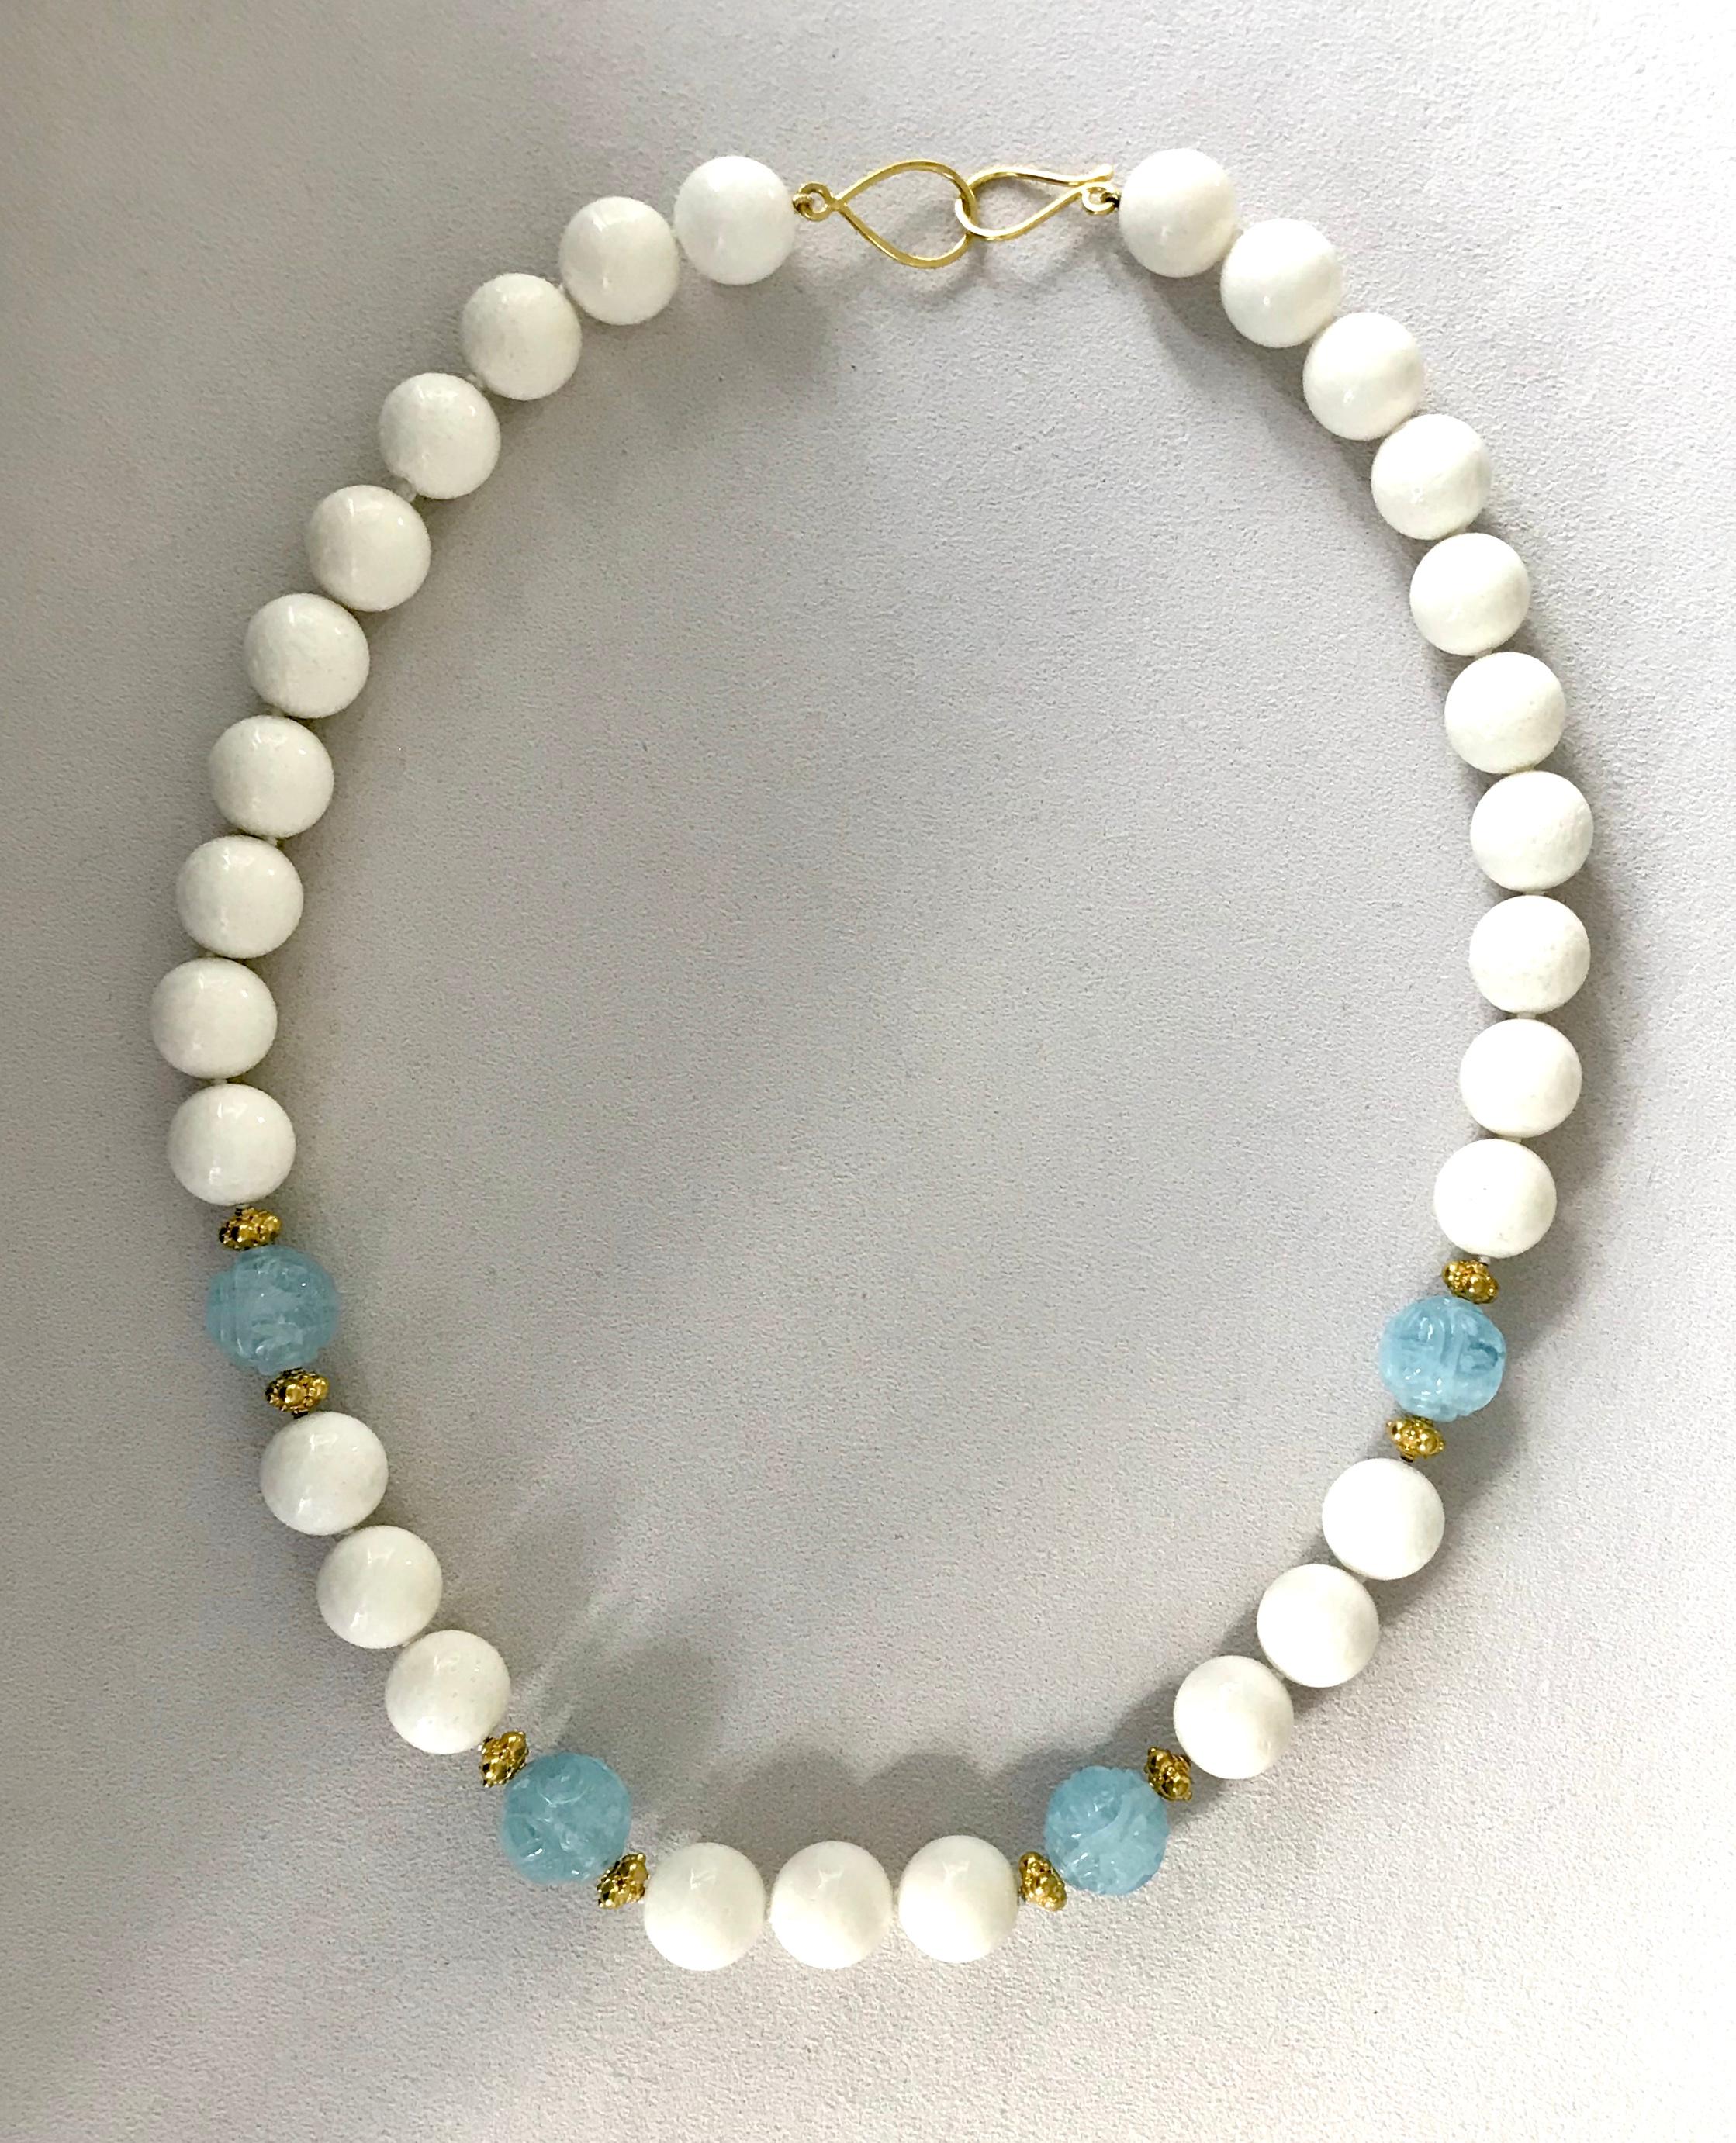 Women's 18 Karat Yellow Gold White Coral Carved Aquamarine Beaded Necklace